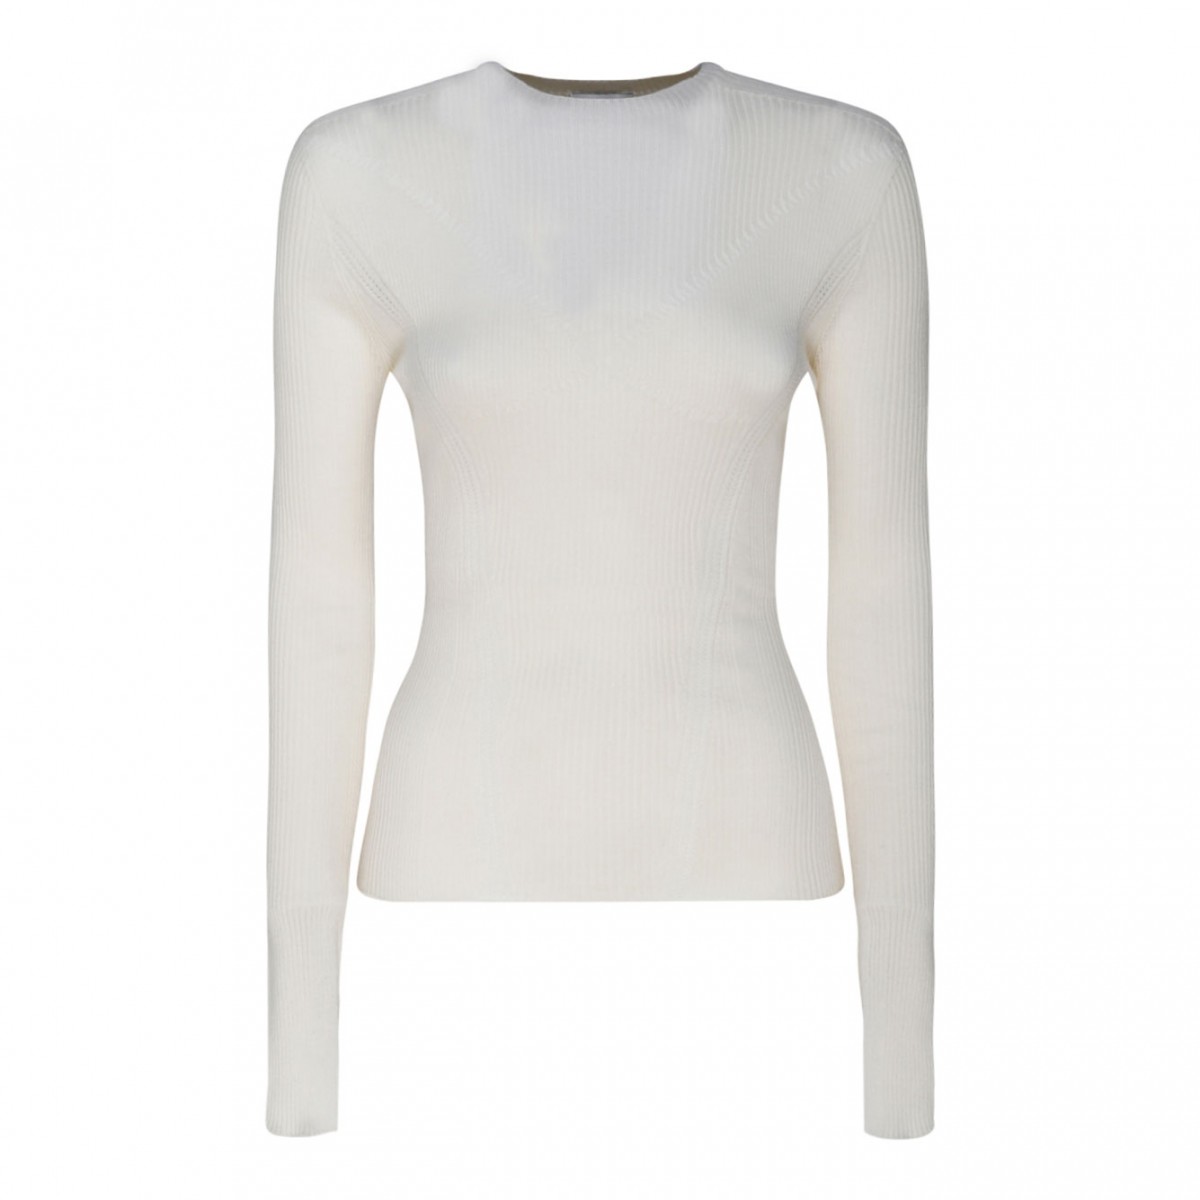 Lanvin Milk White Cashmere Long Sleeve Ribbed Knit Top